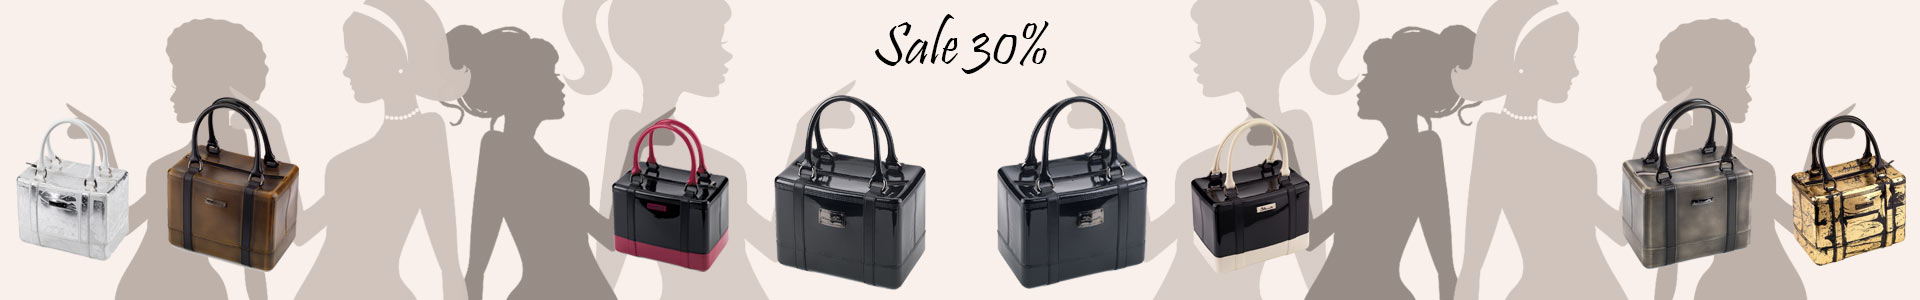 Special promotion for chic and fashionable mothers!